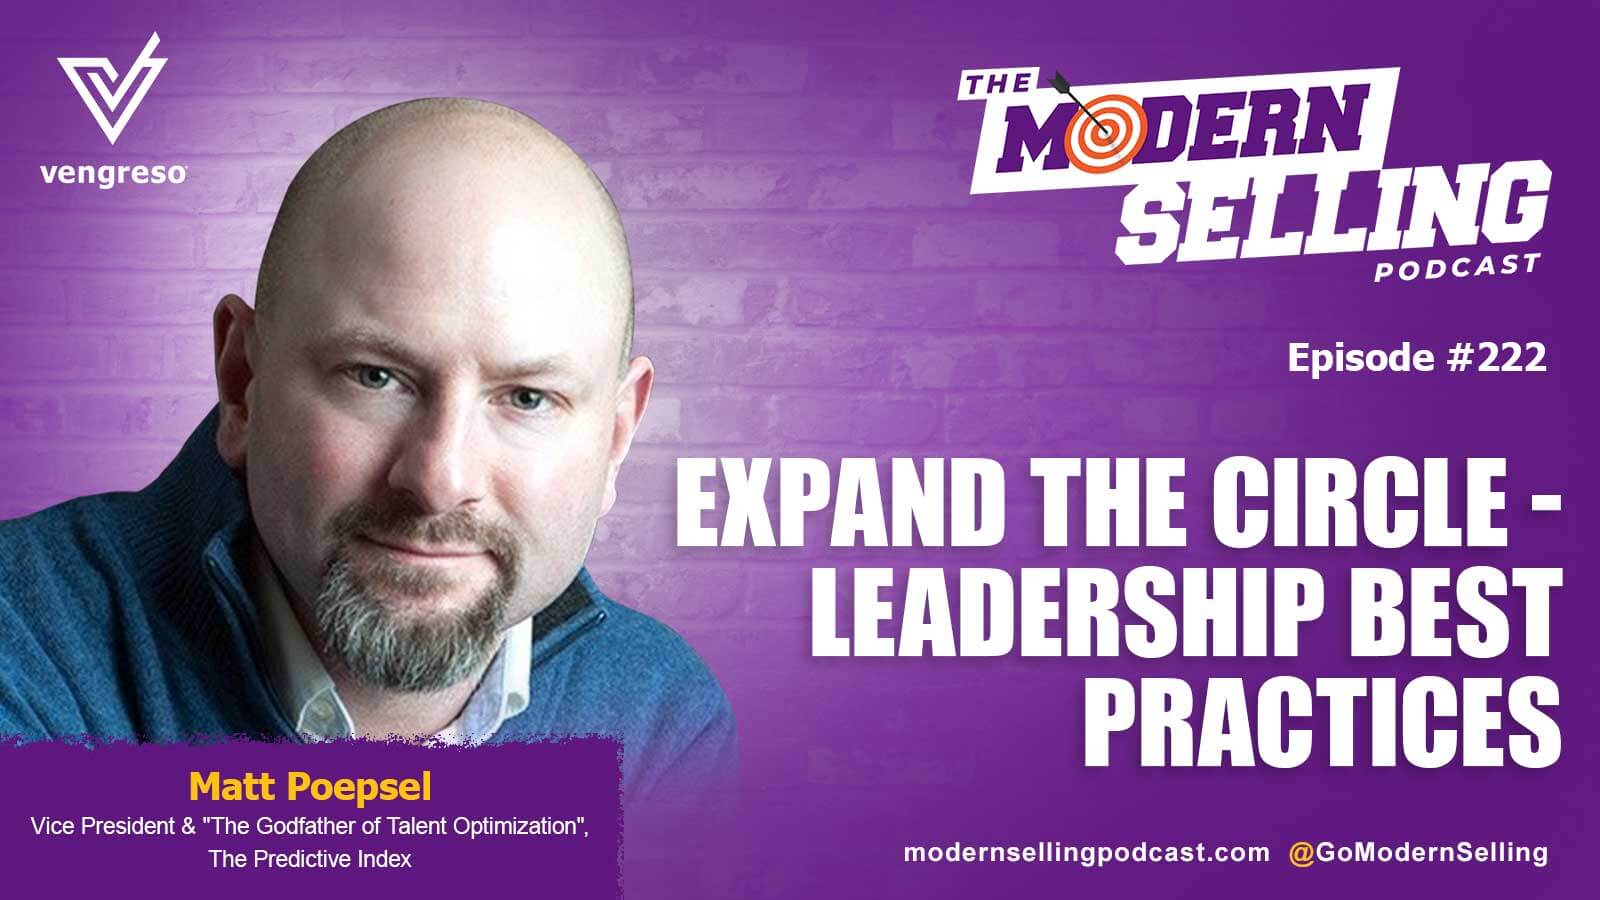 Keywords: Expand the Circle, Leadership Best Practices with Matt Poepsel